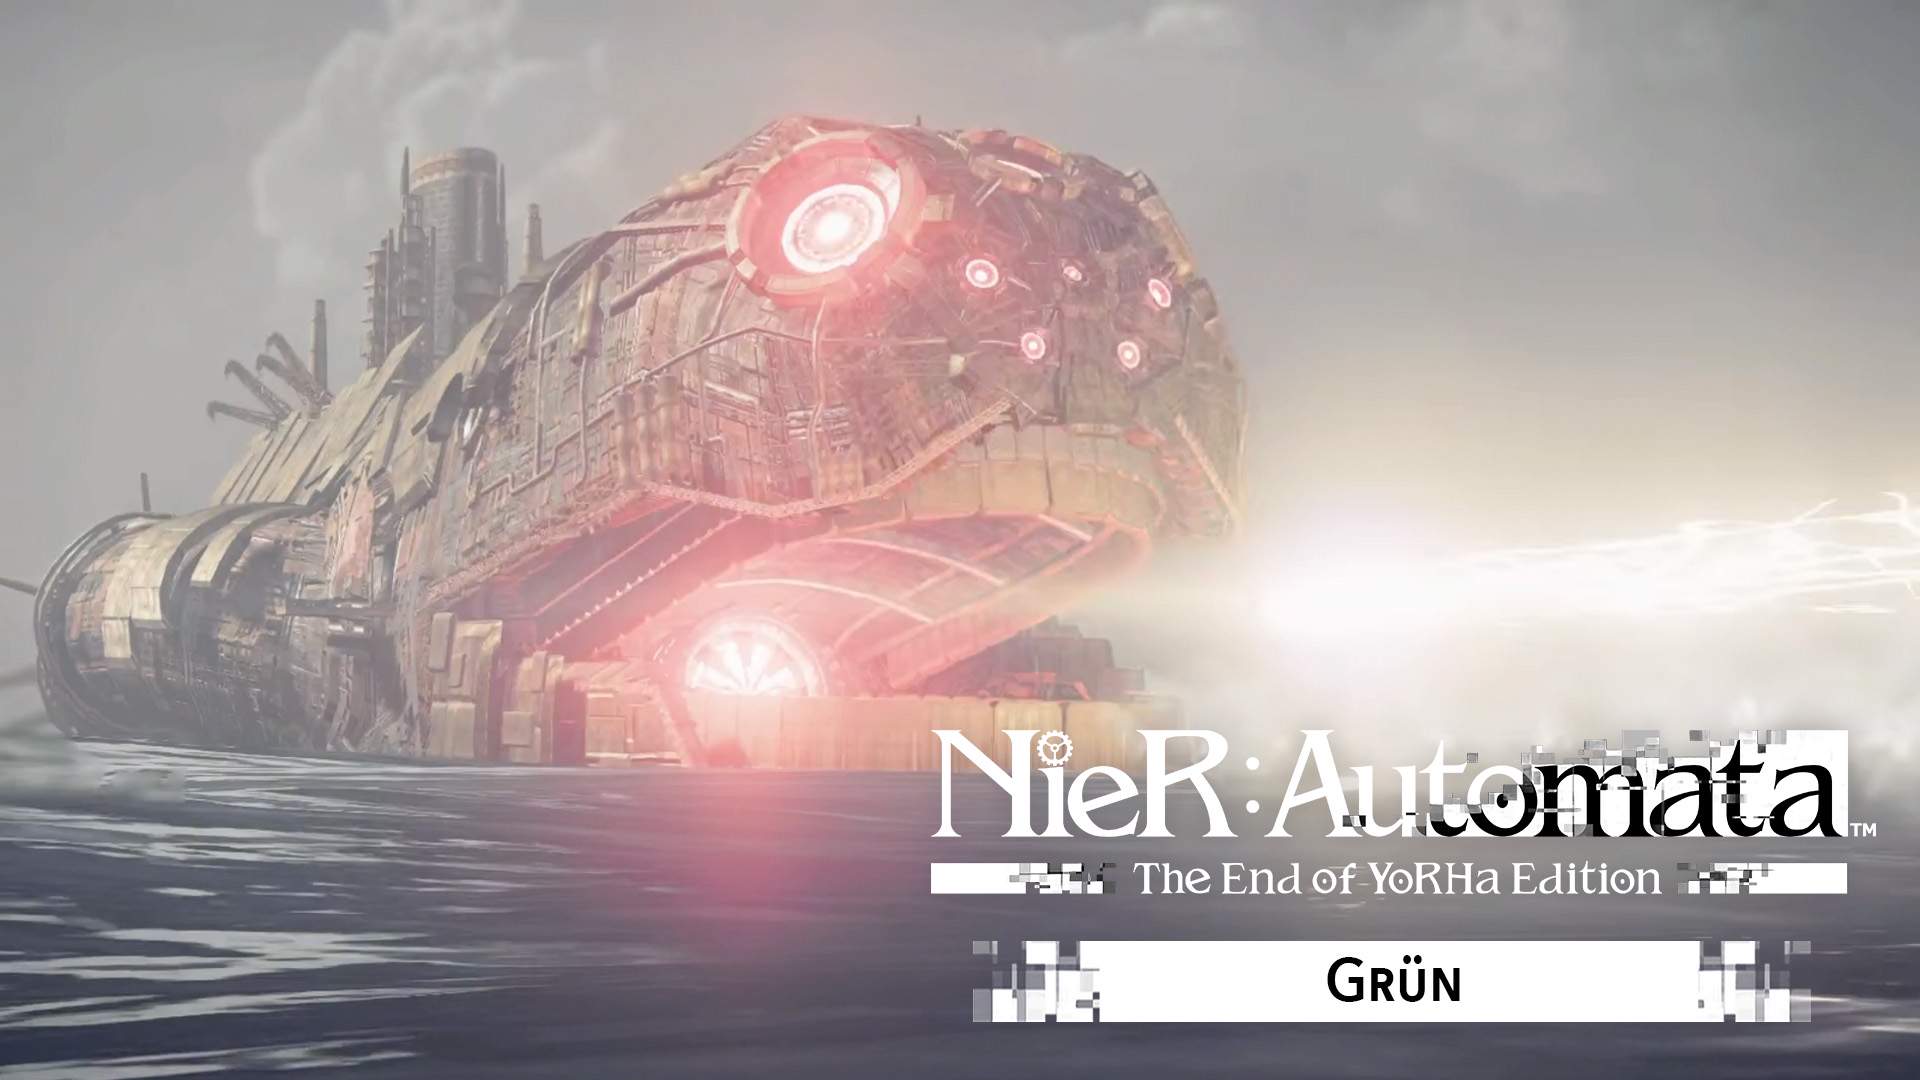 Grun, a massive mechanical entity is in the sea shooting a laser.